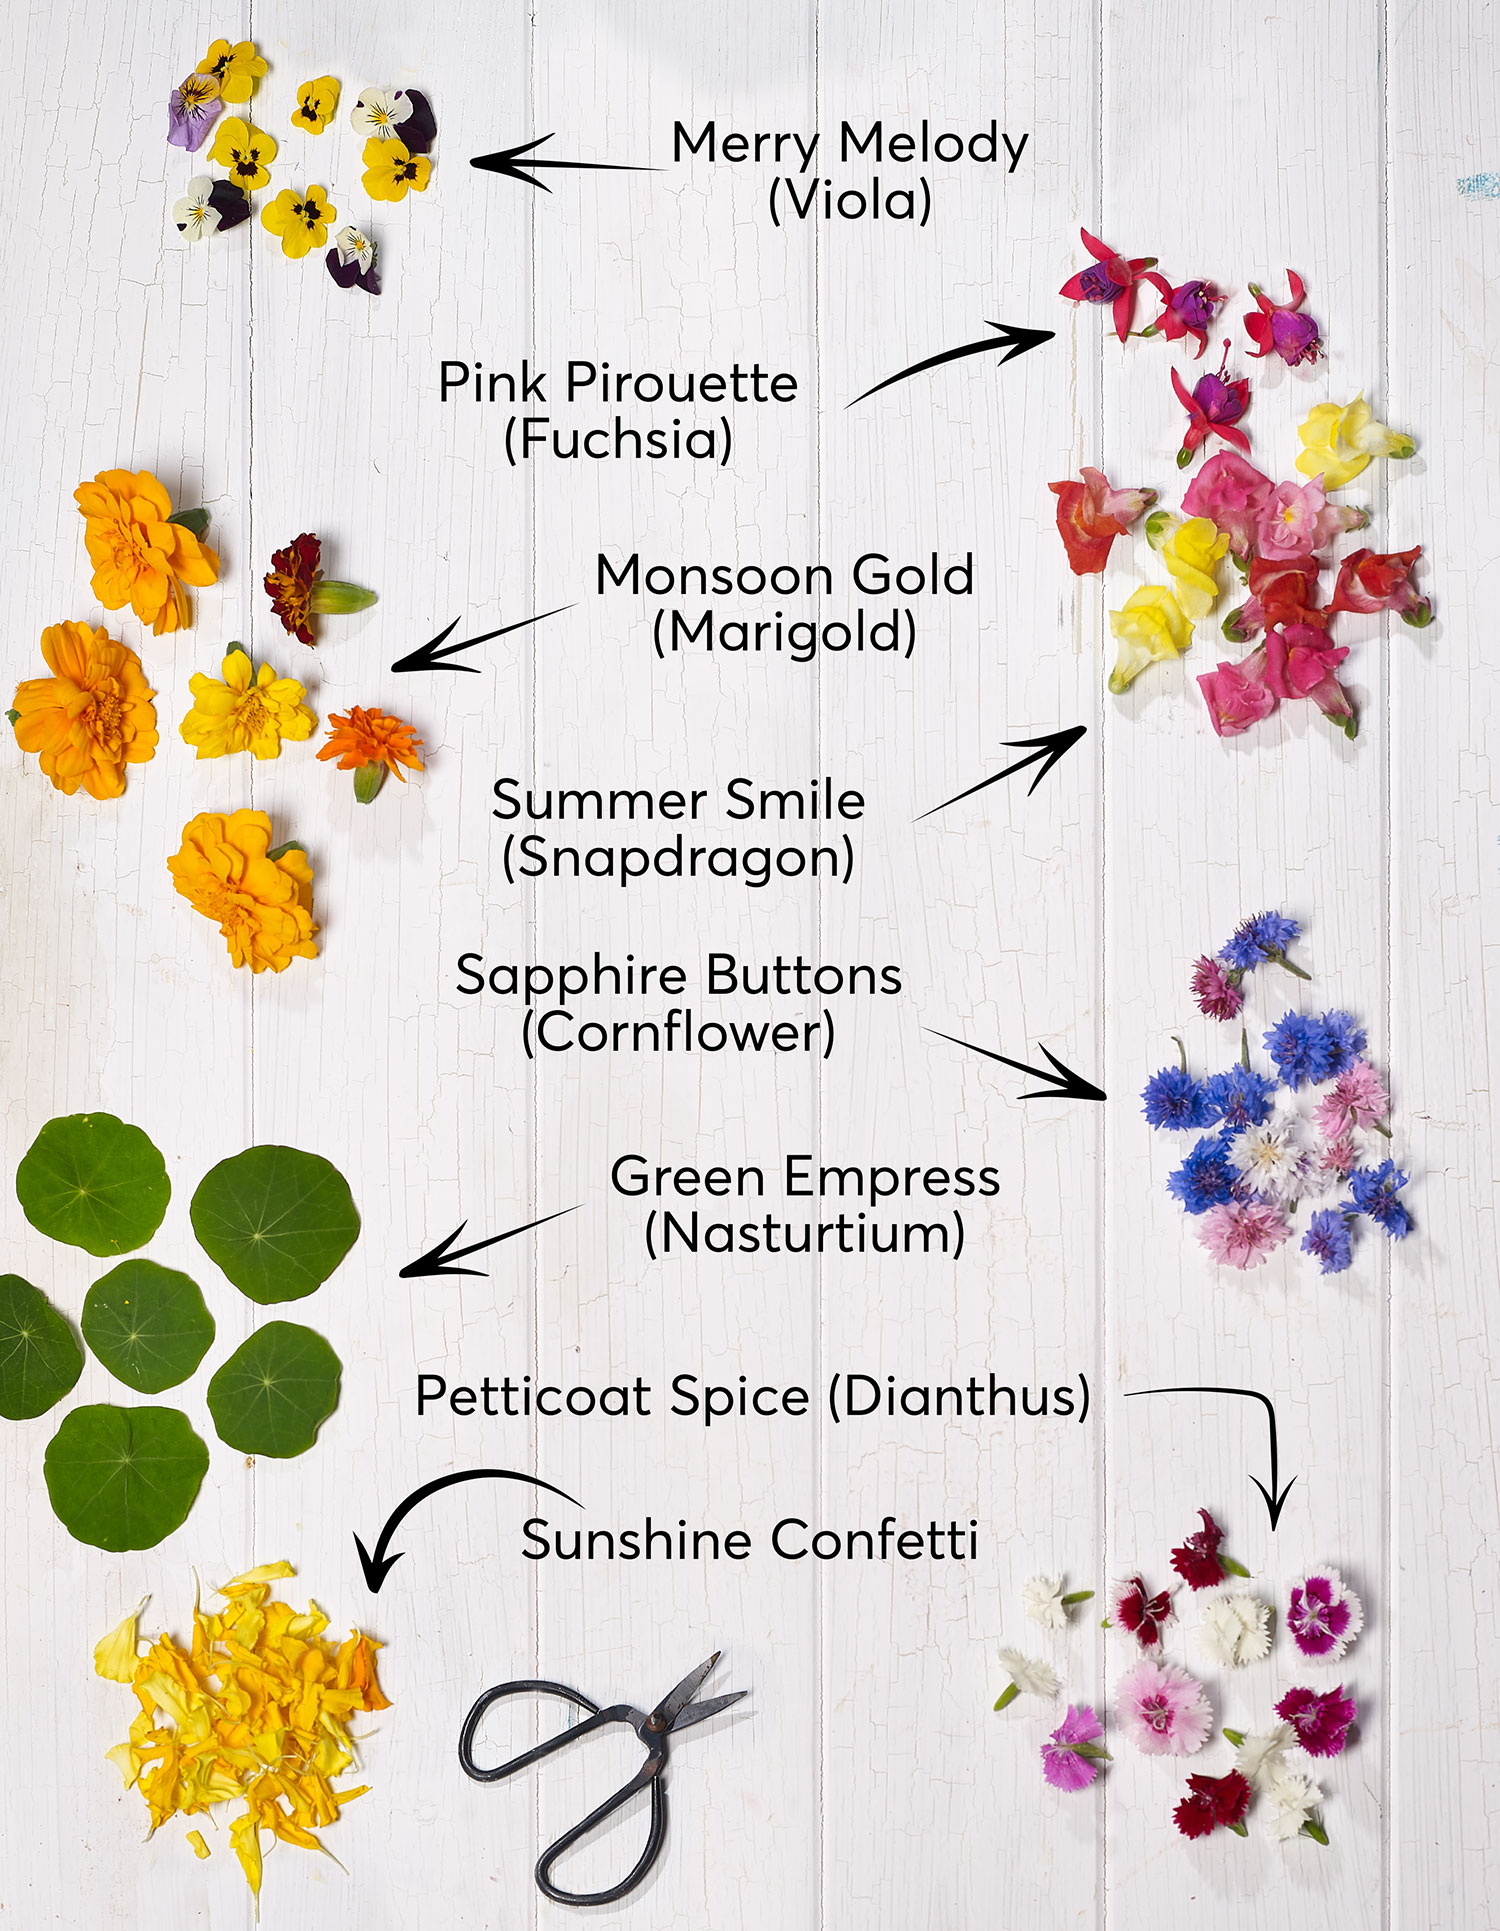 Flowerdale Farm - a guide to edible flowers